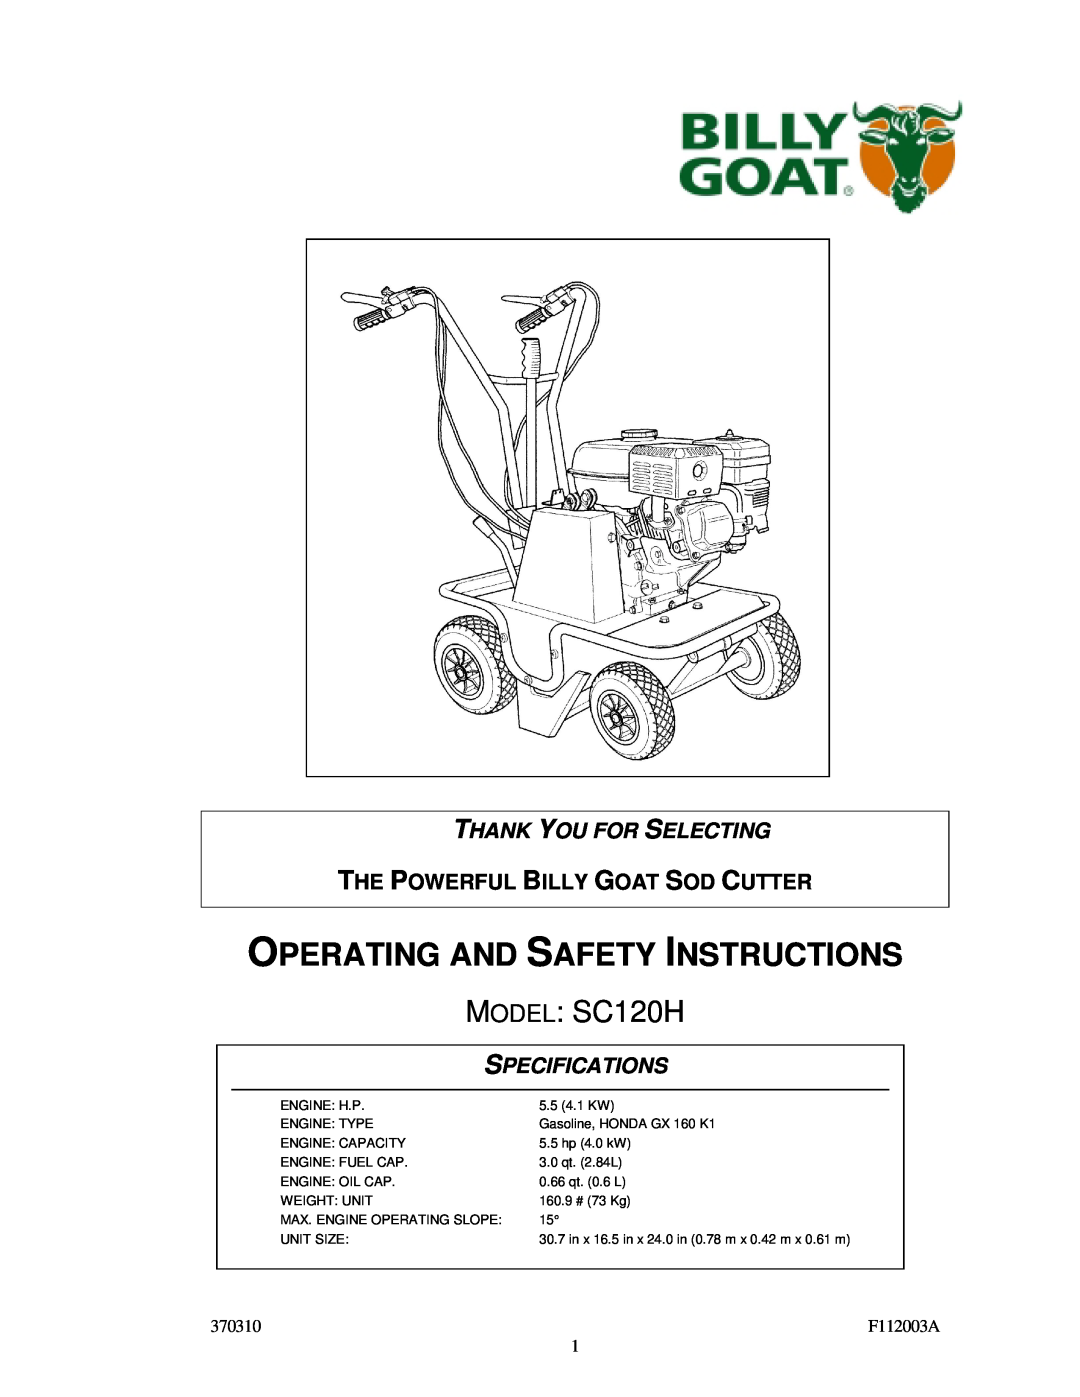 Billy Goat specifications Operating And Safety Instructions, MODEL: SC120H, Thank You For Selecting, Specifications 